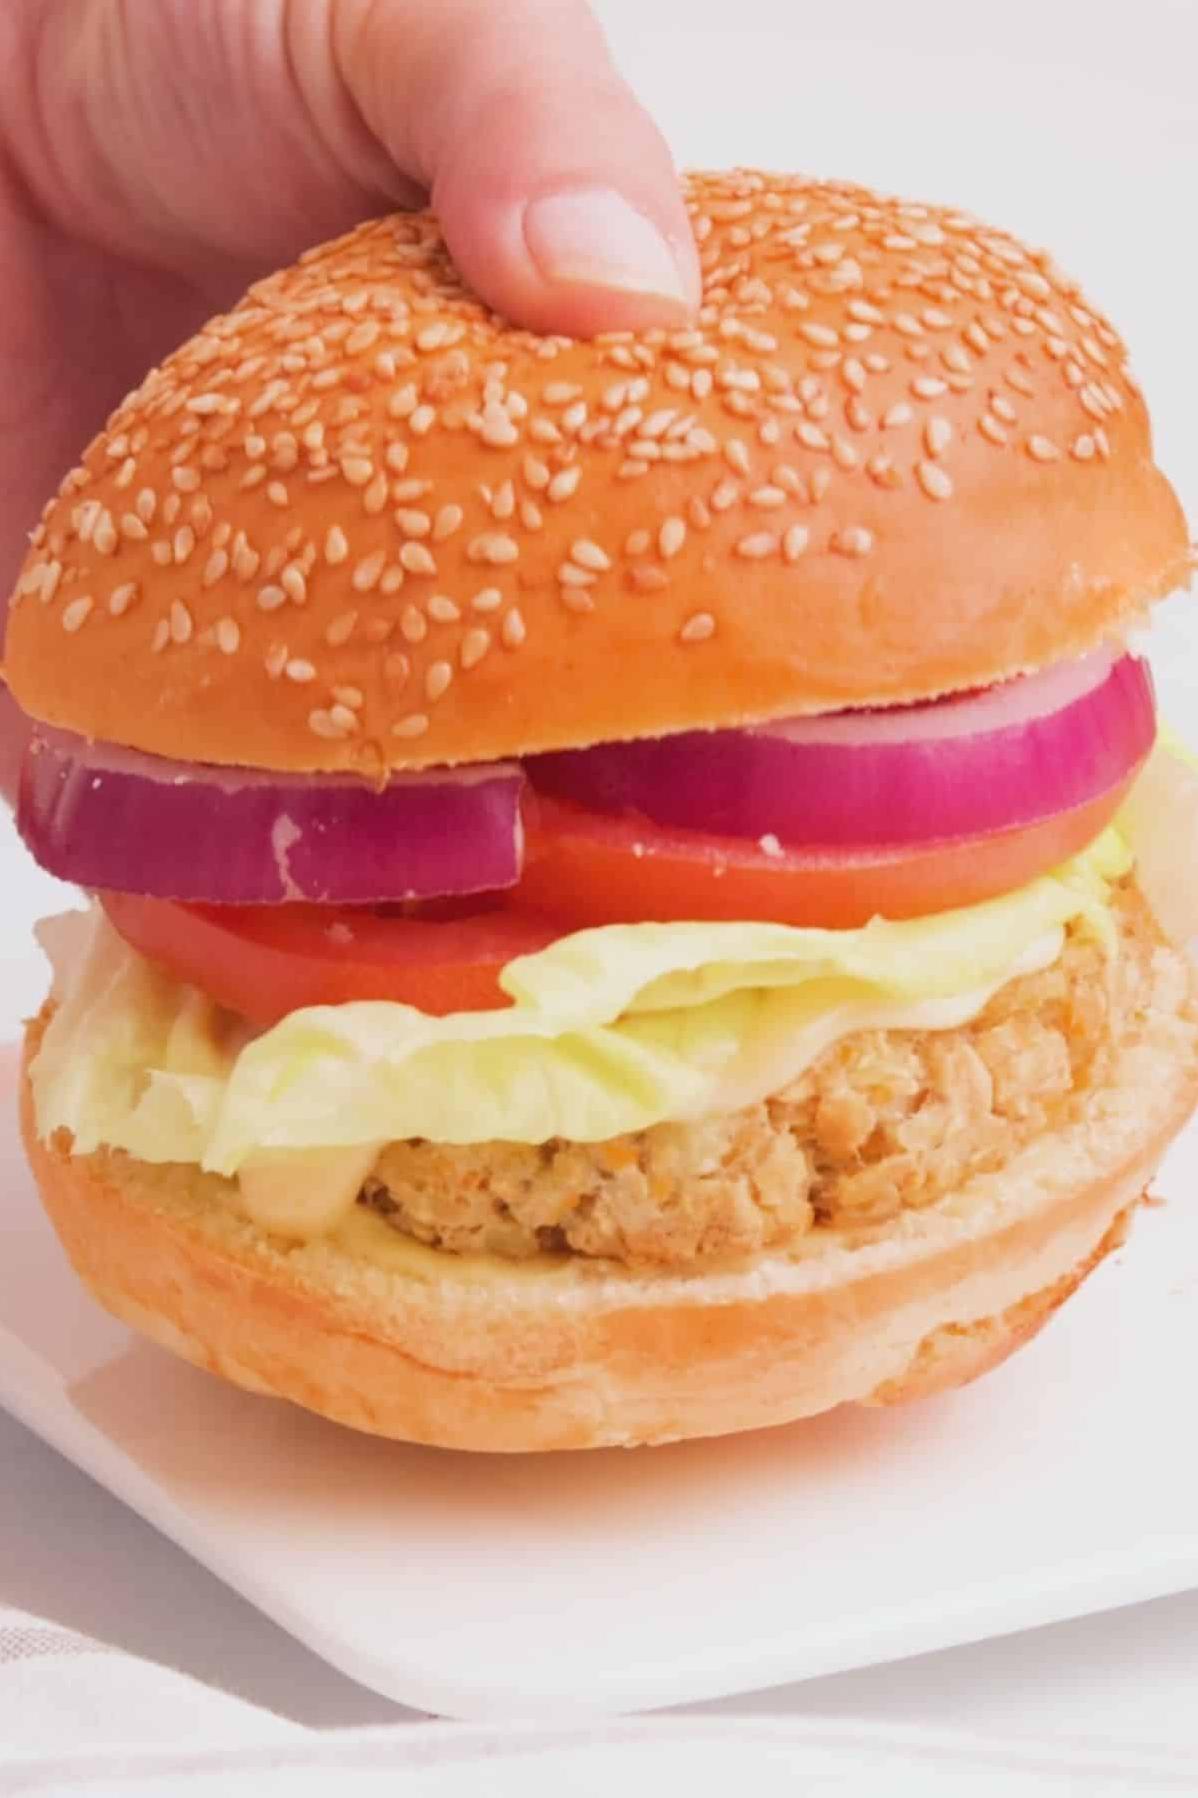  Sink your teeth into this delicious gluten-free mock chicken burger!